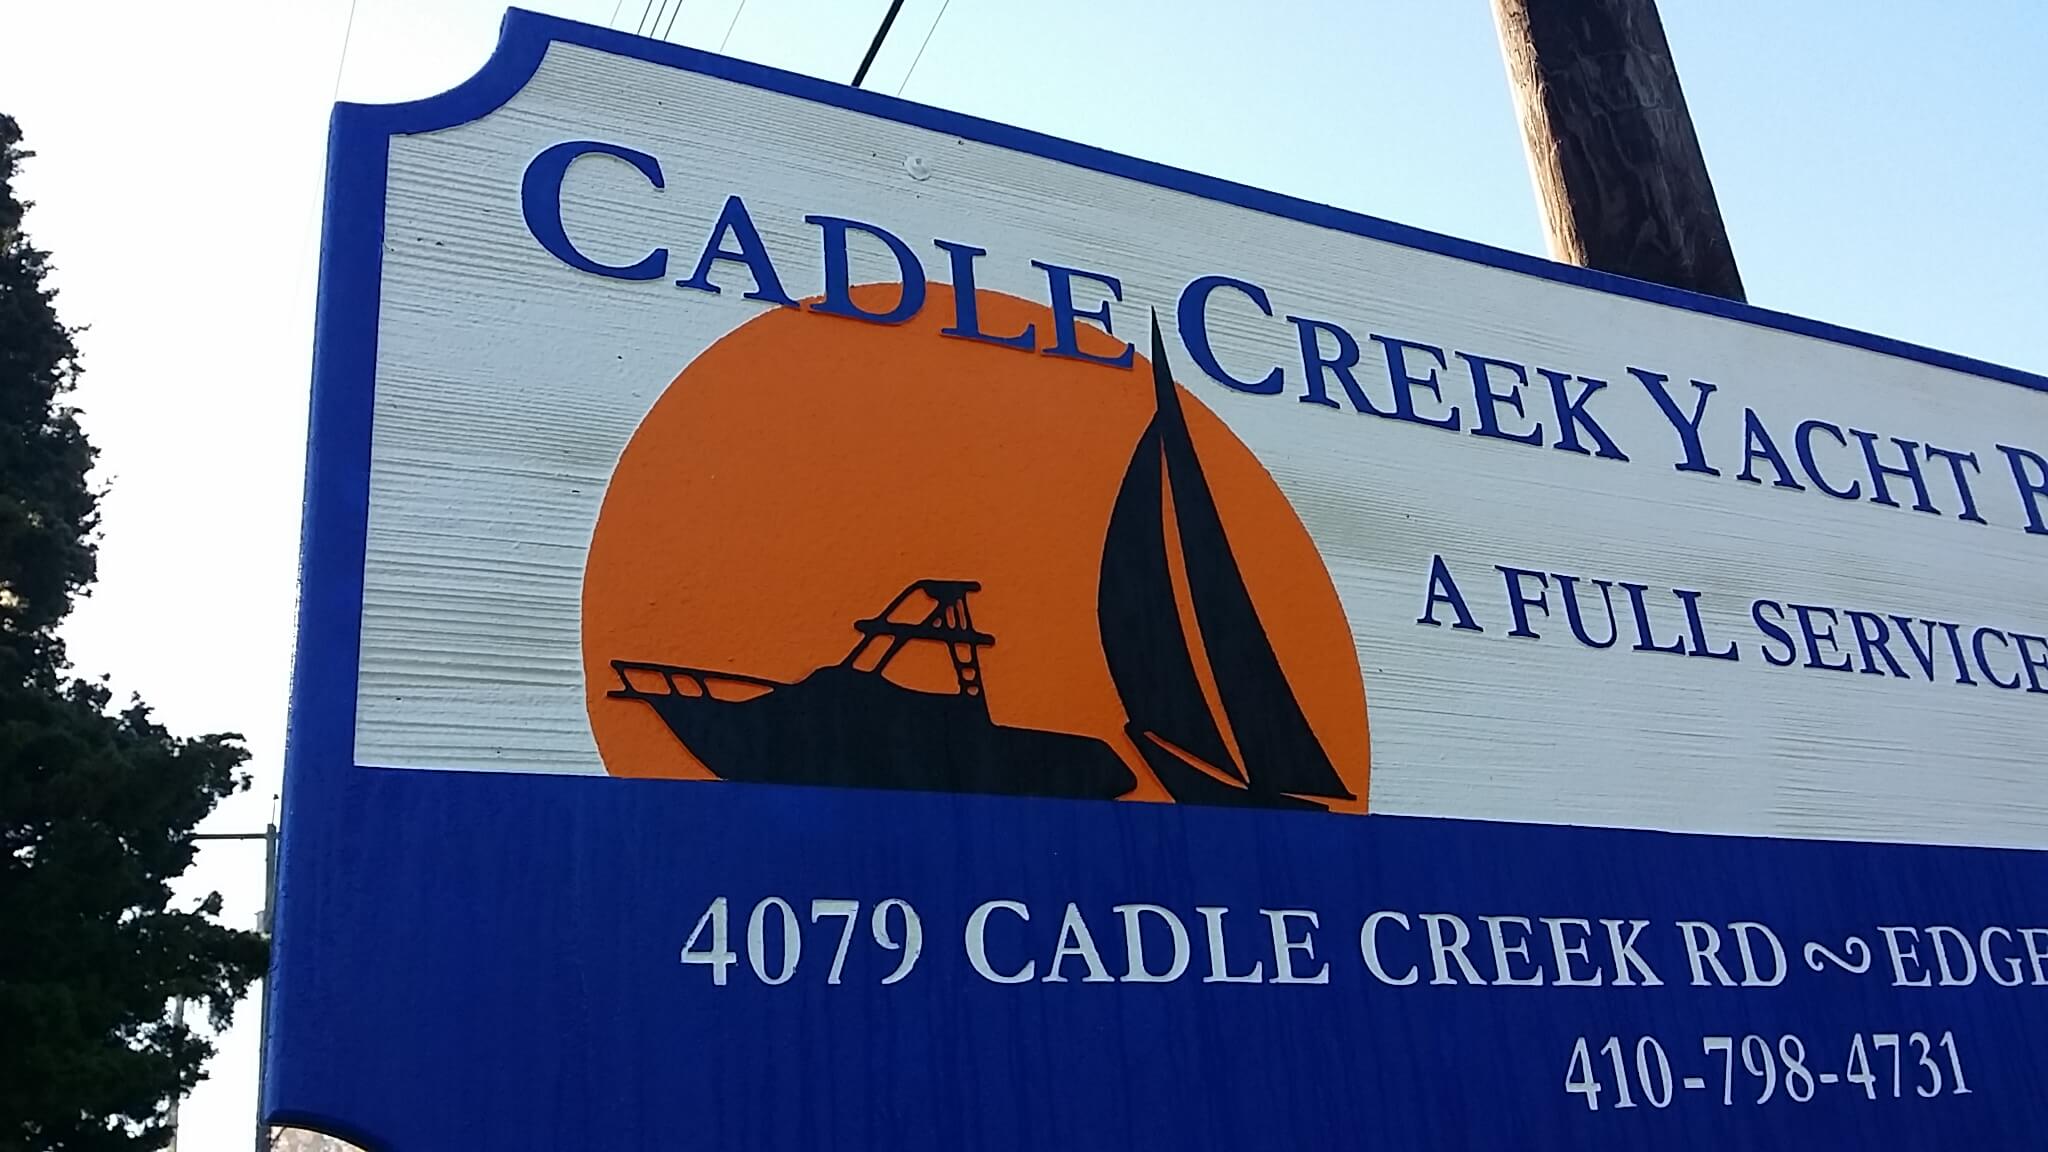 Carved Business Signs, a Sandblasted Sign – HDU at Cadle Creek!